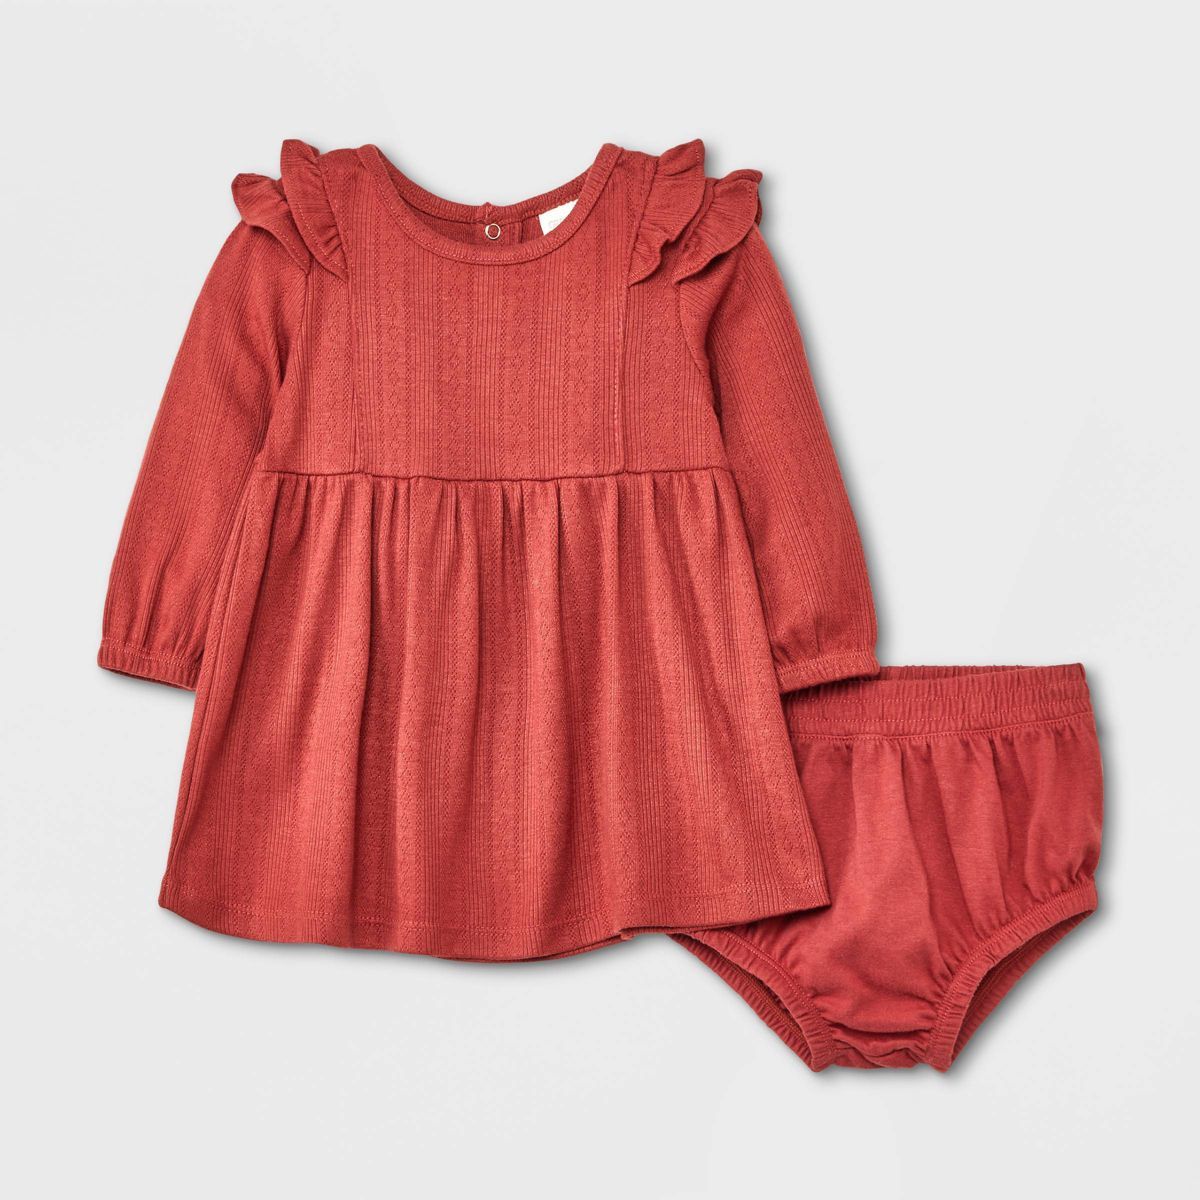 Grayson Collective Baby Girls' Solid 2pc Top & Bottom Set - Red | Target